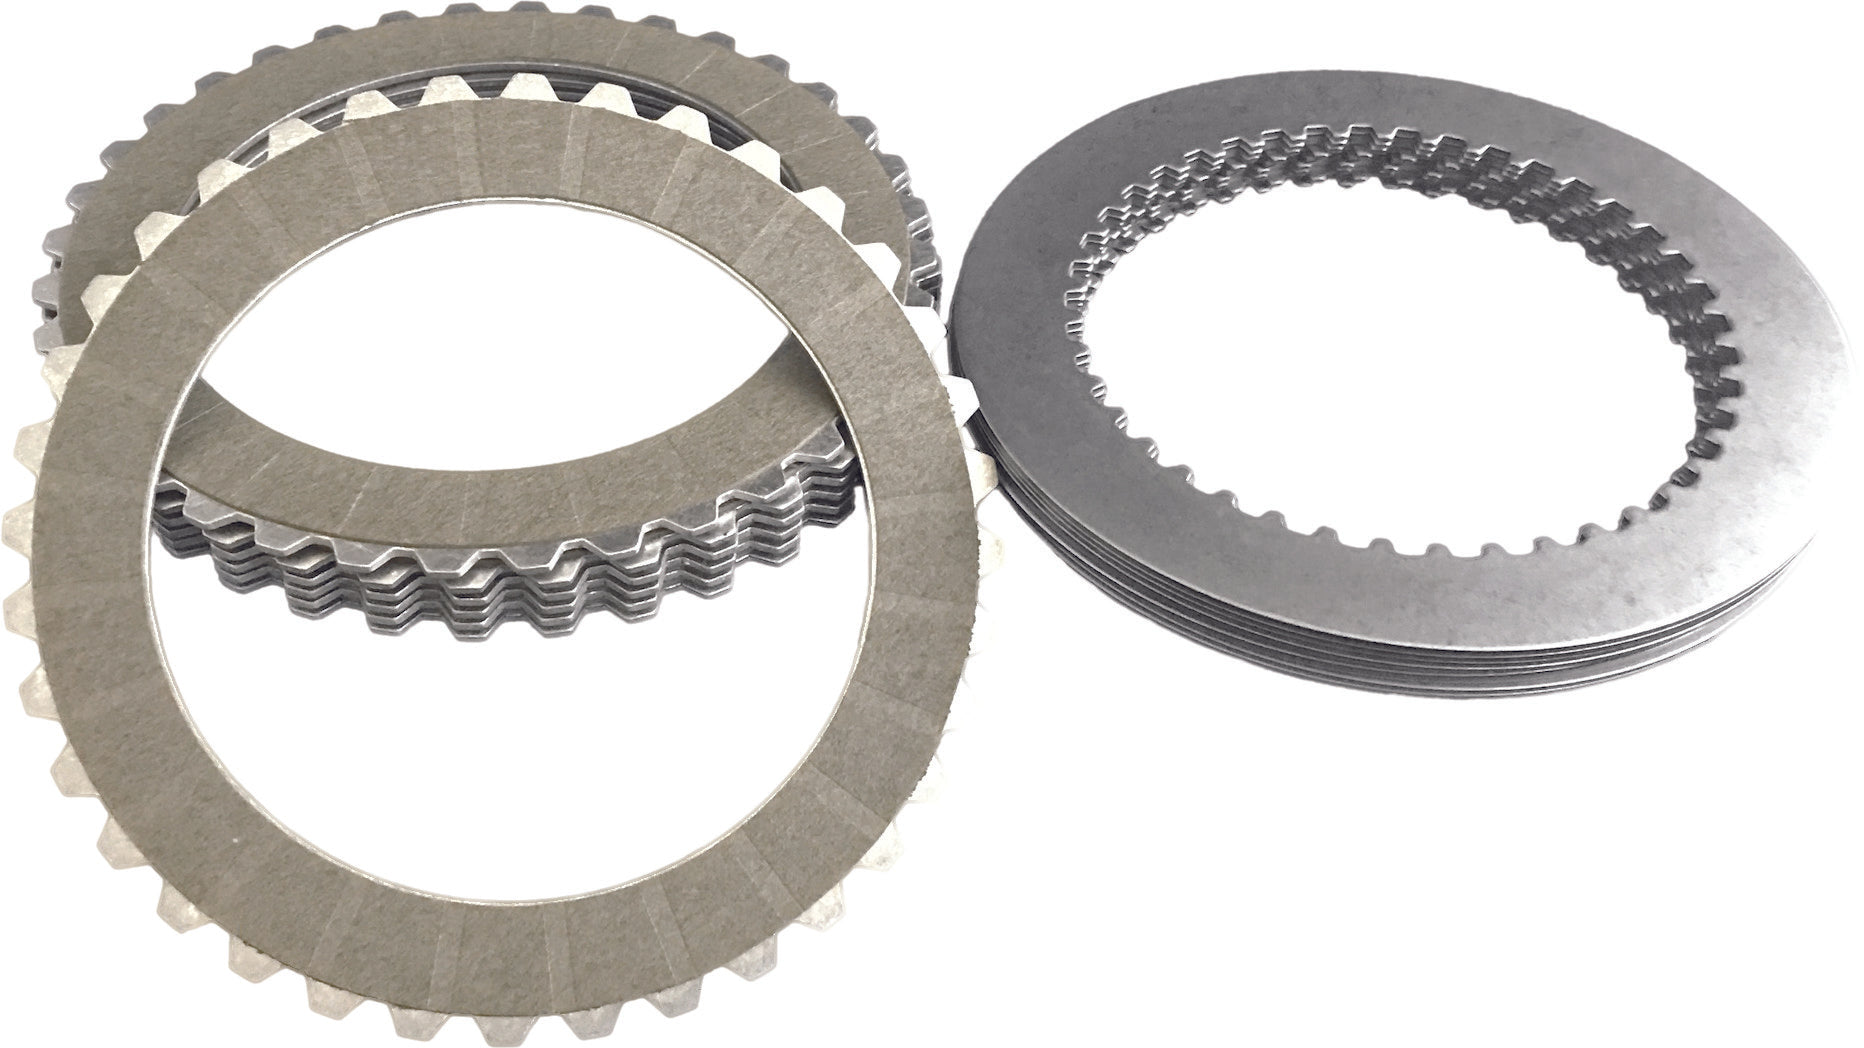 ENERGY ONE, ENERGY ONE E1 REPLACEMENT CLUTCH KIT FOR BRUTE III IV EXTREME NEW HUB RP-0050